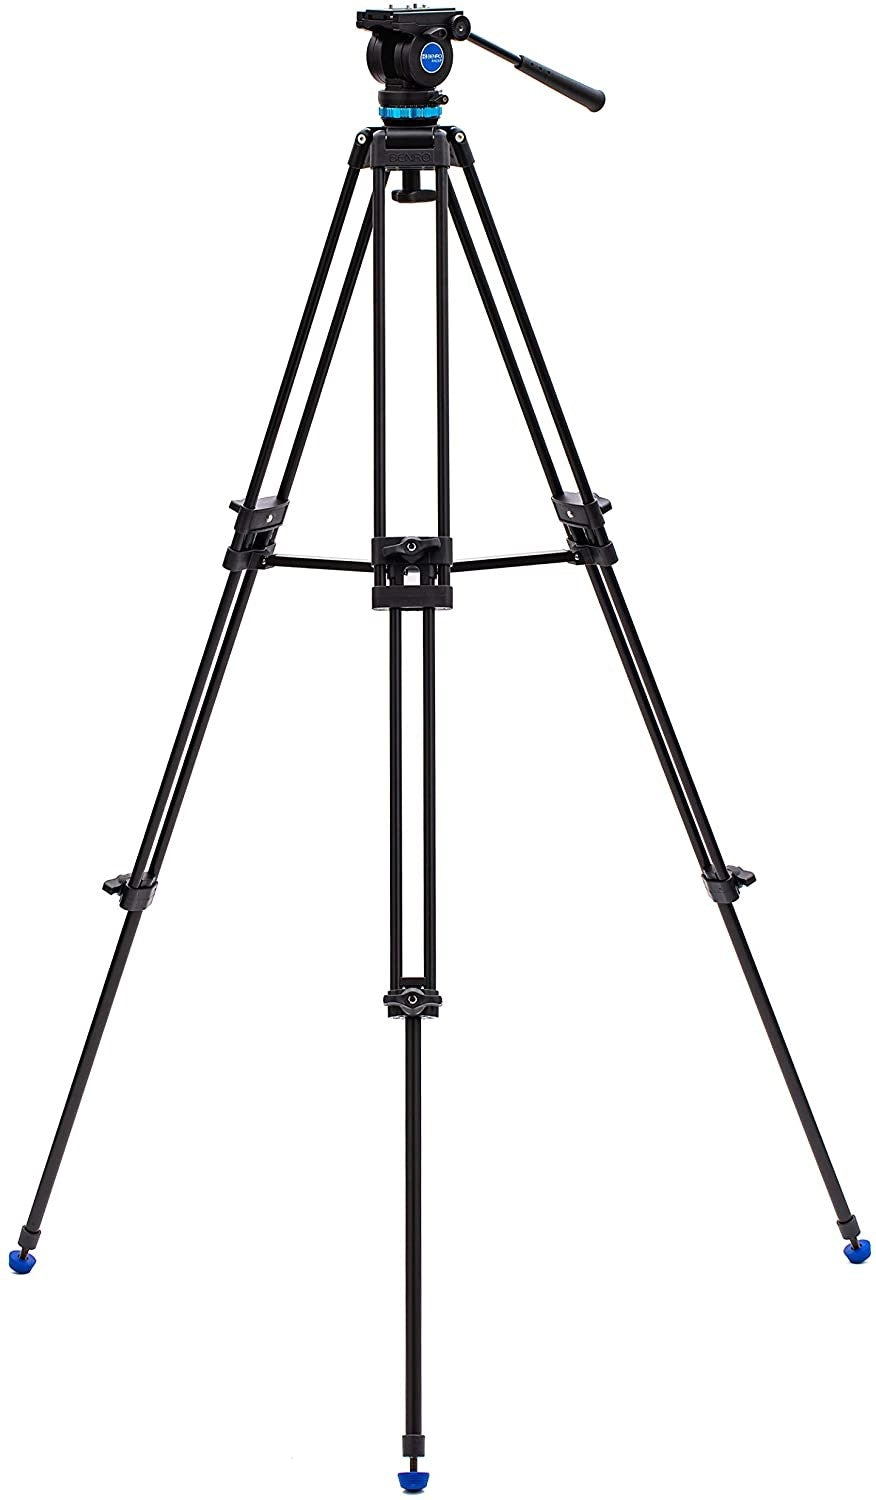 Product Image of Benro KH25P Video Tripod with Head, 5kg Payload, Continuous Pan Drag, Anti-Rotation Camera Plate